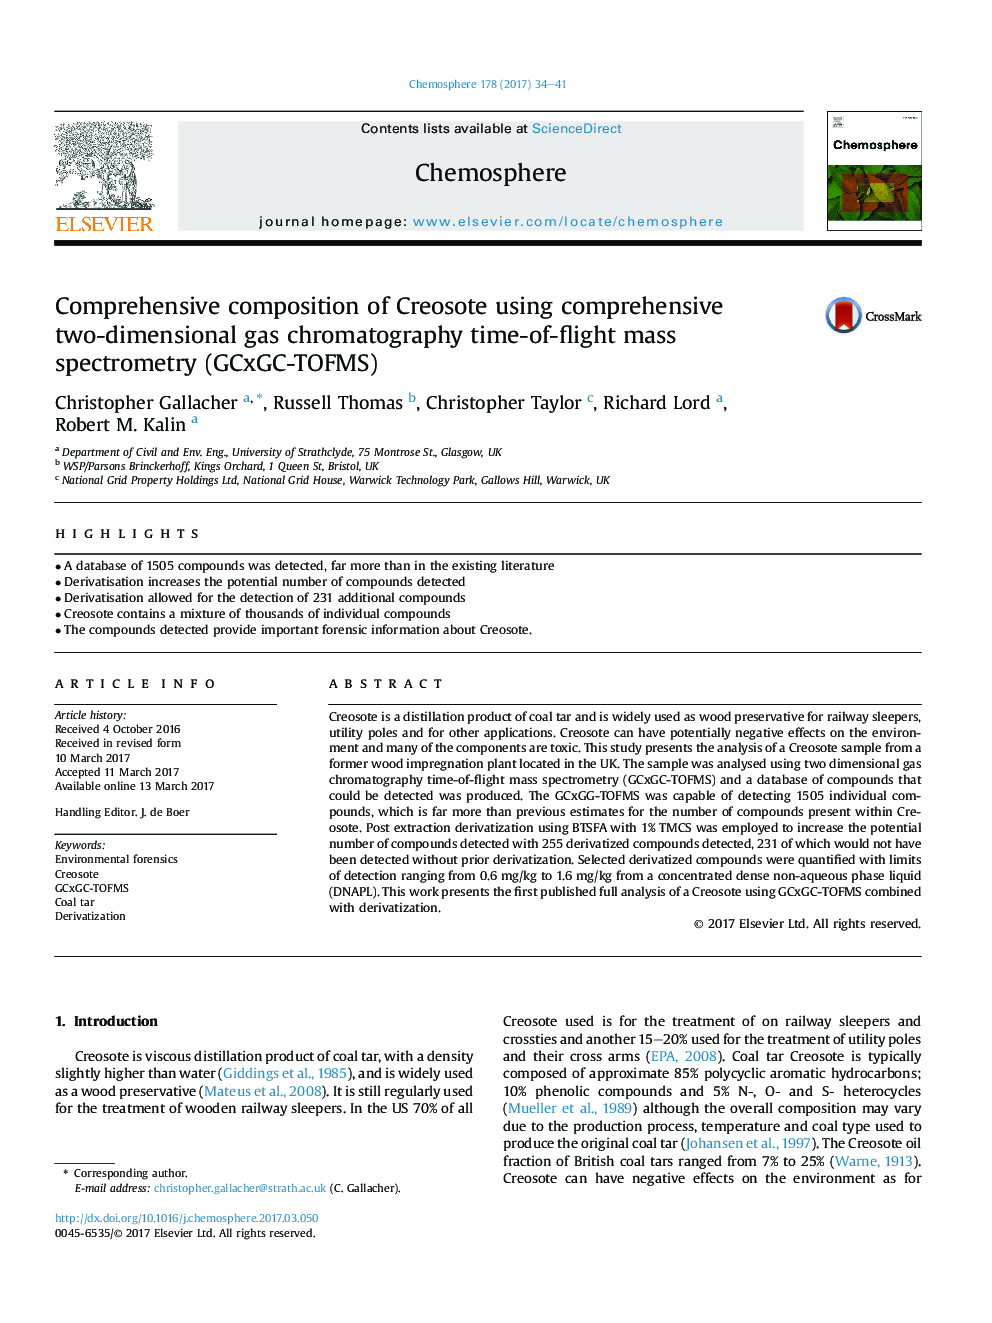 Comprehensive composition of Creosote using comprehensive two-dimensional gas chromatography time-of-flight mass spectrometry (GCxGC-TOFMS)